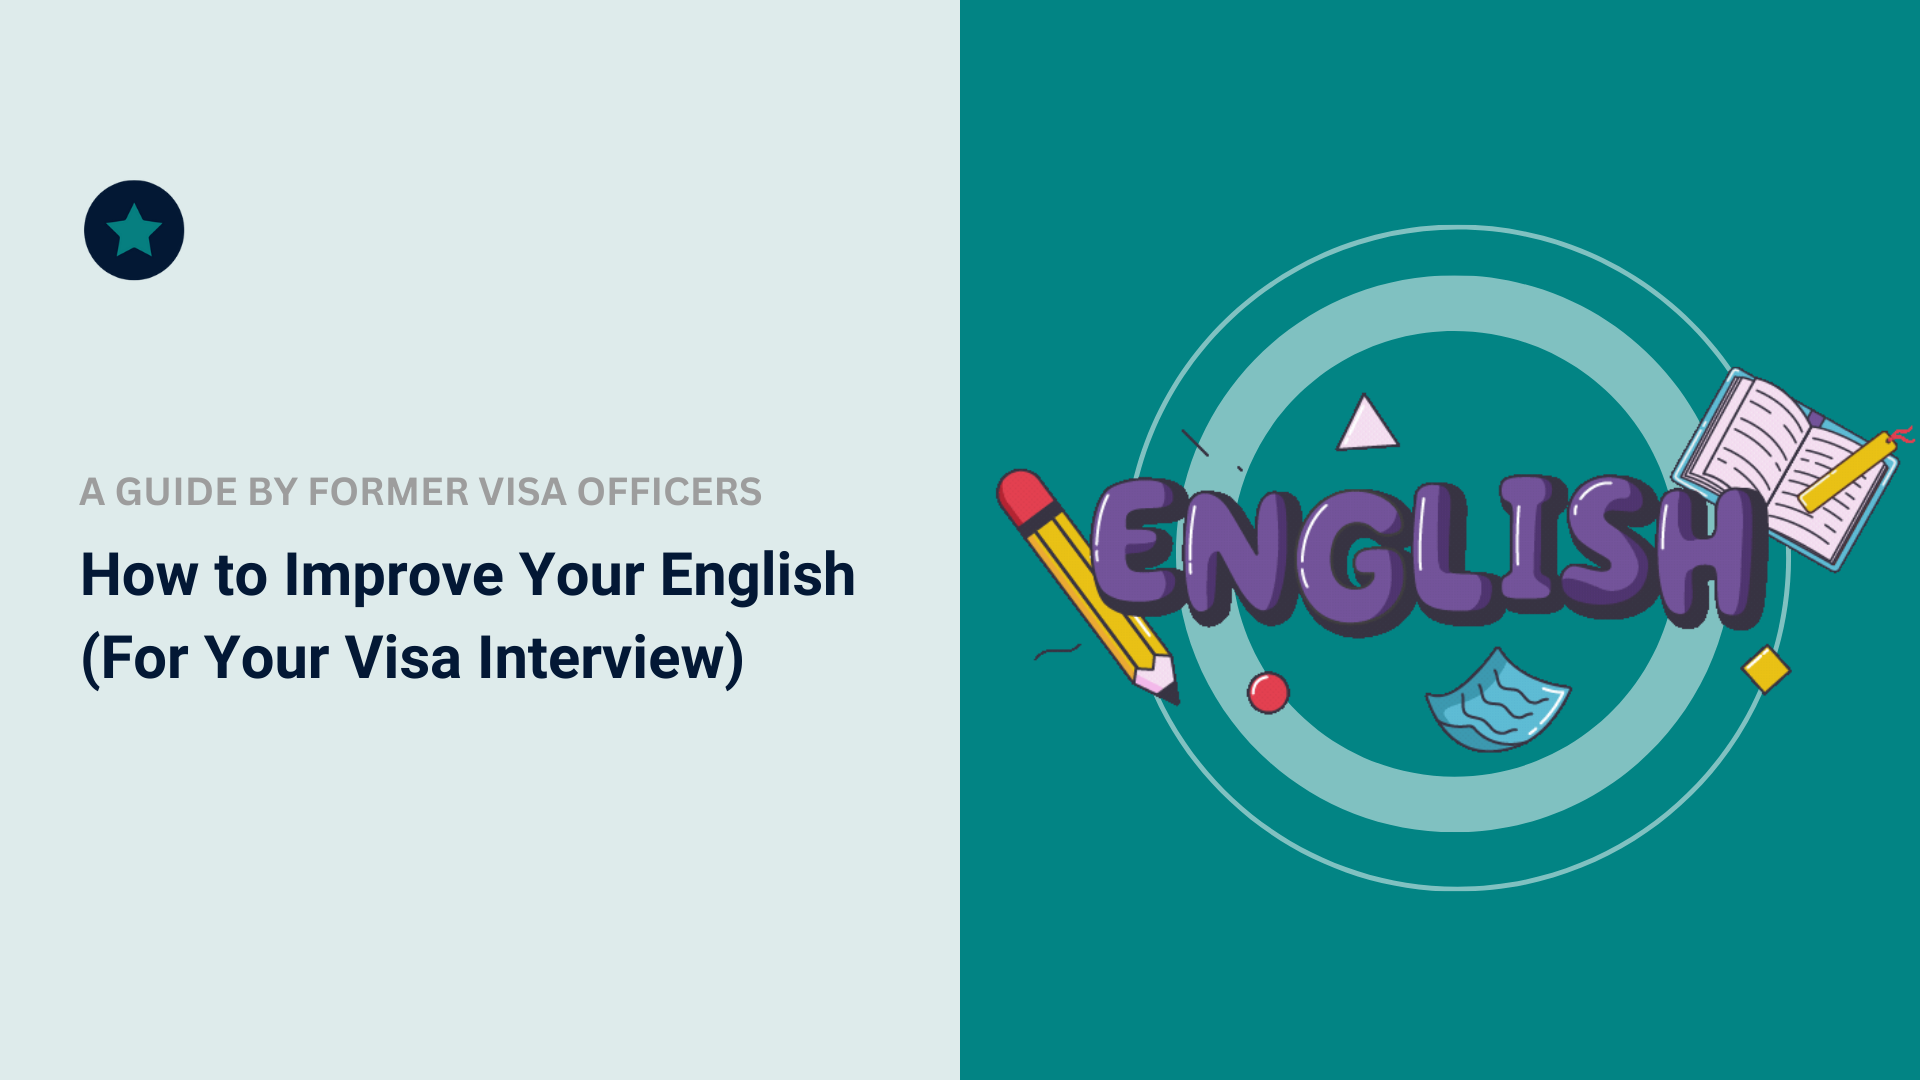 How to Improve Your English (For Your Visa Interview)